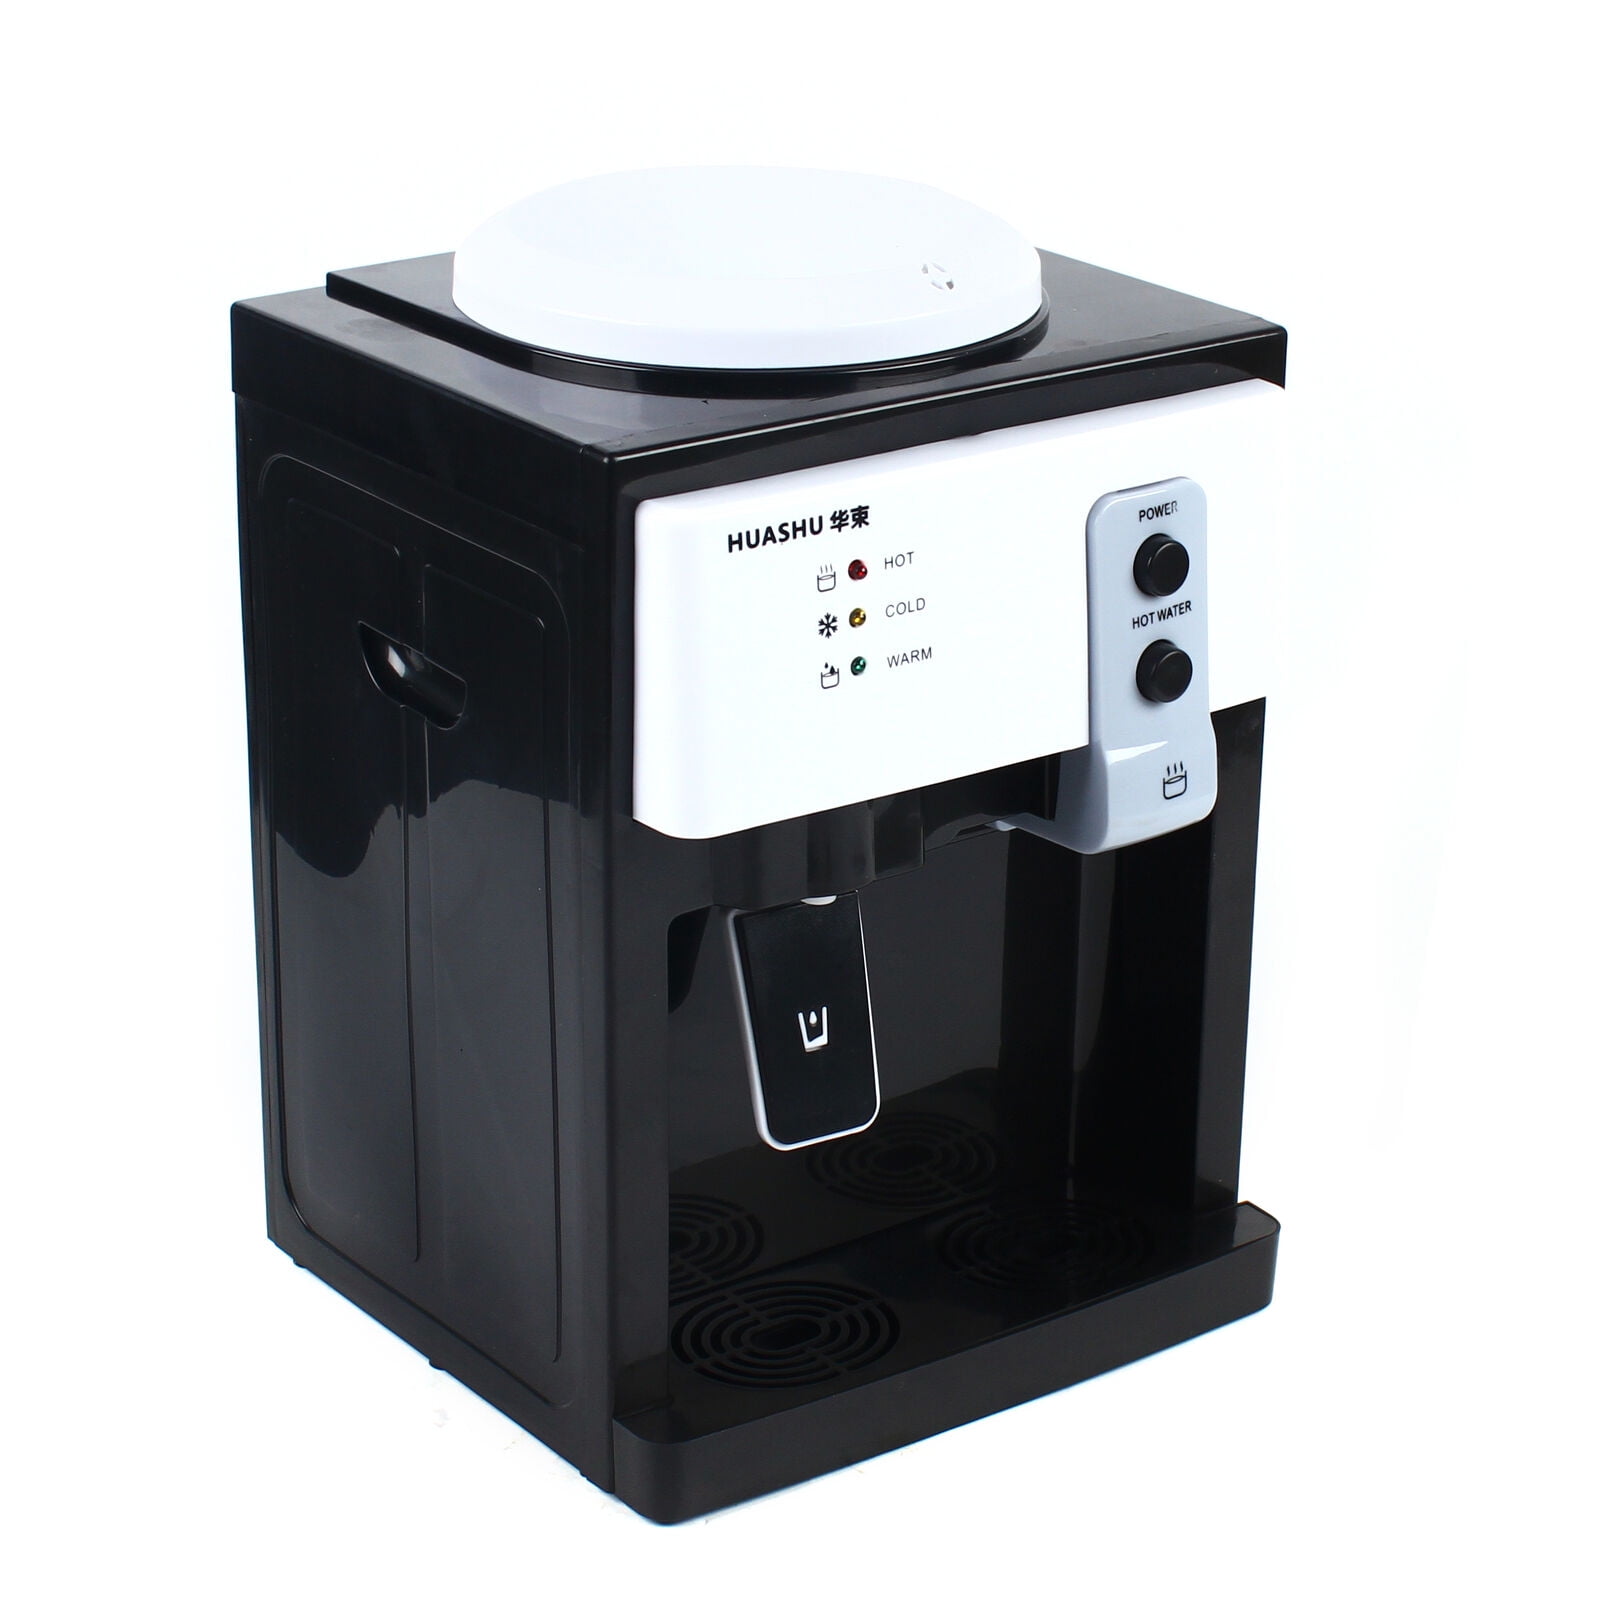 Hot drink dispenser 5 gallons rentals Detroit MI  Where to rent hot drink  dispenser 5 gallons in Detroit and all of Southeast Michigan